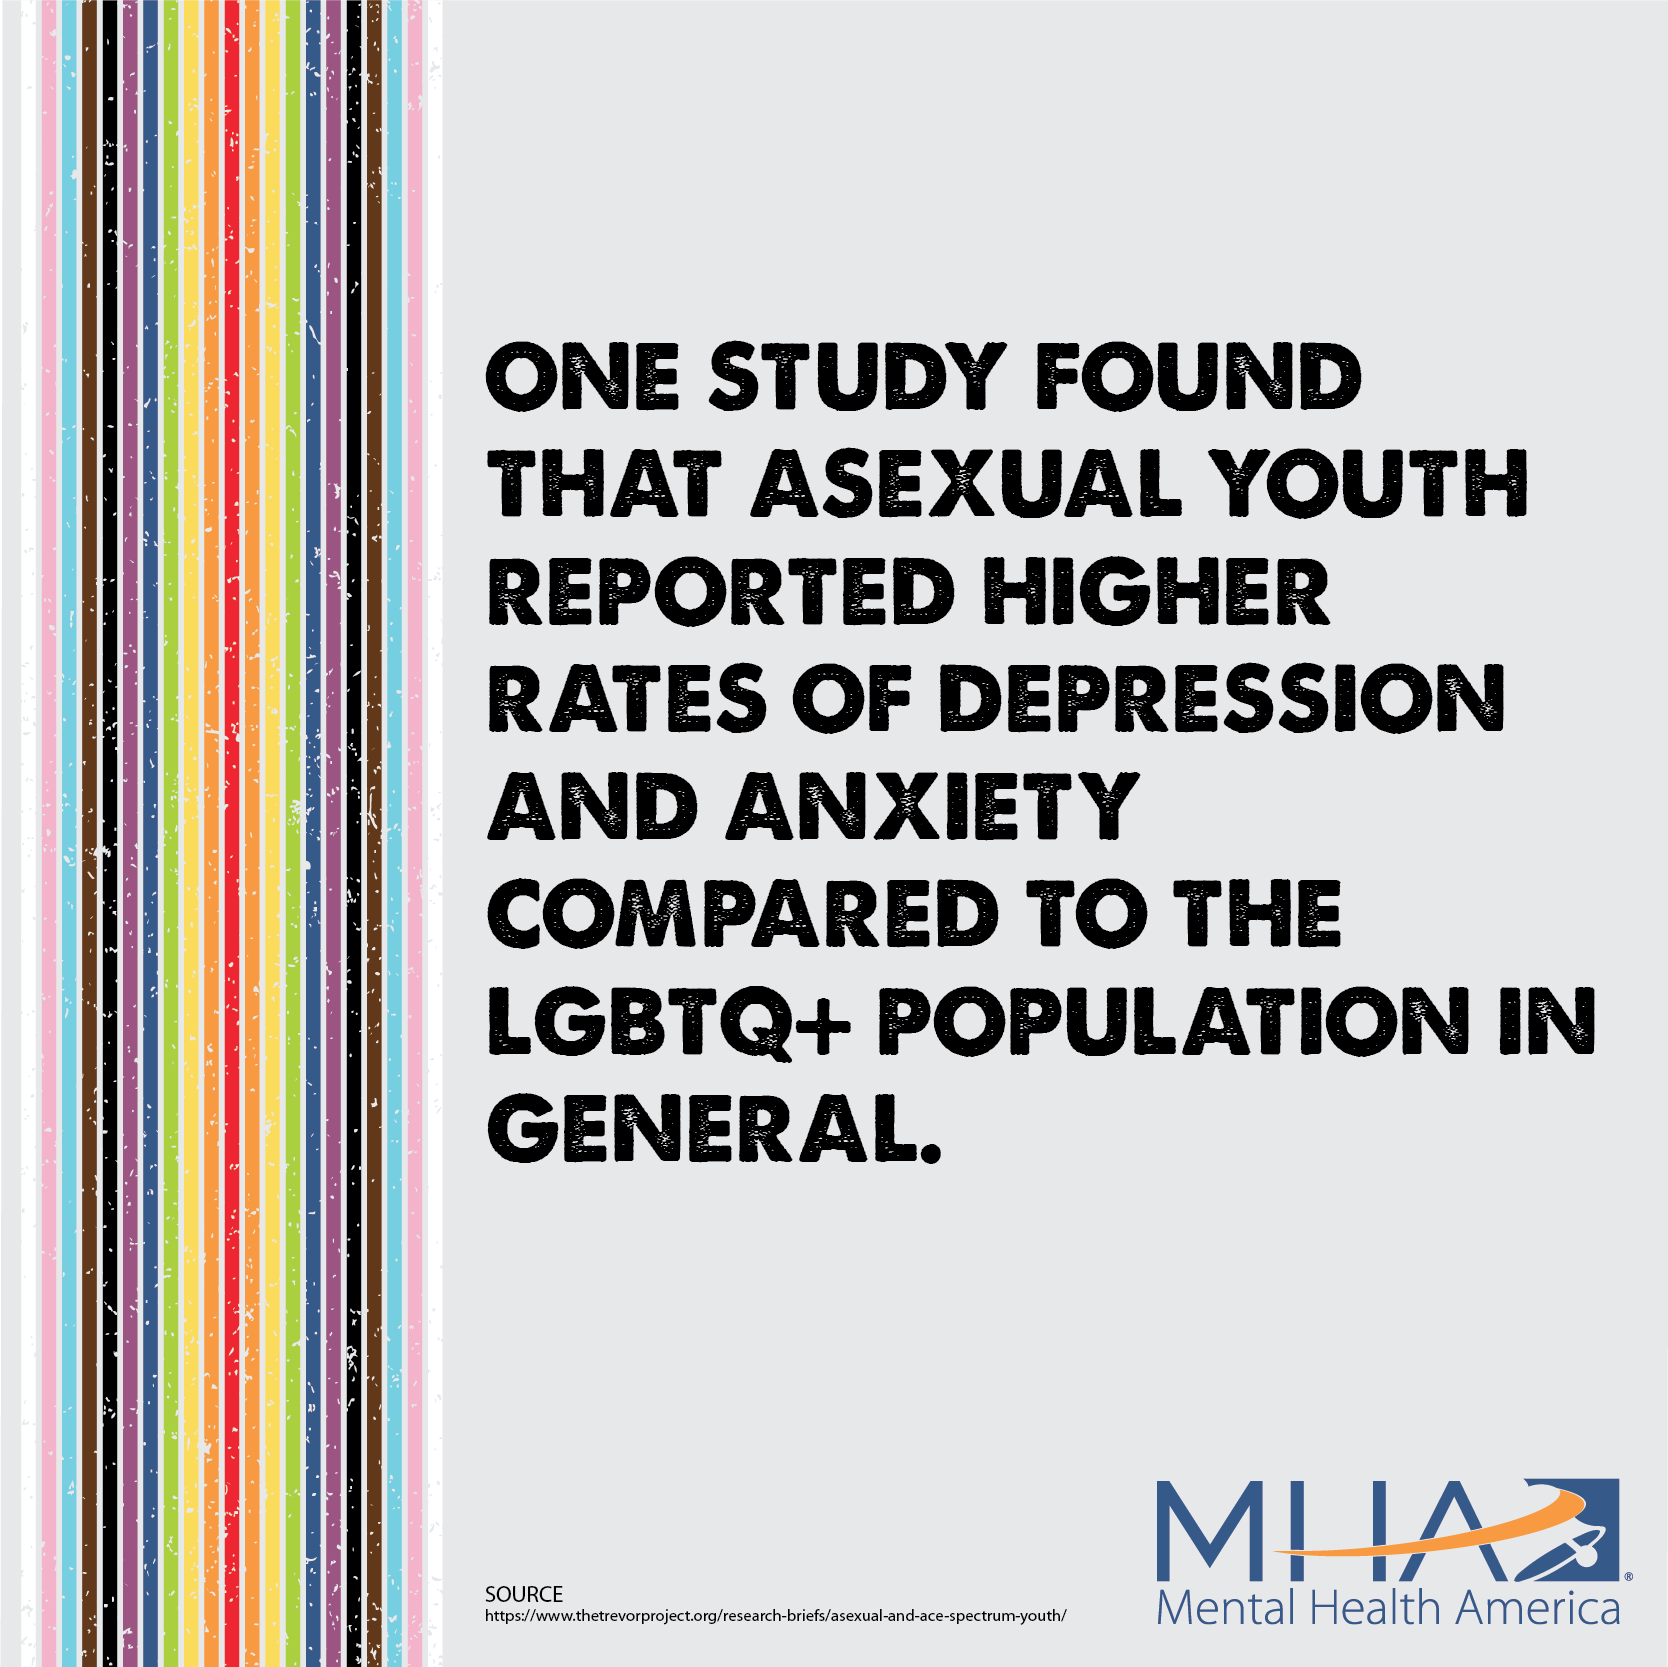 One study found that asexual youth reported higher rates of depression and anxiety compared to the LGBTQ+ population in general.